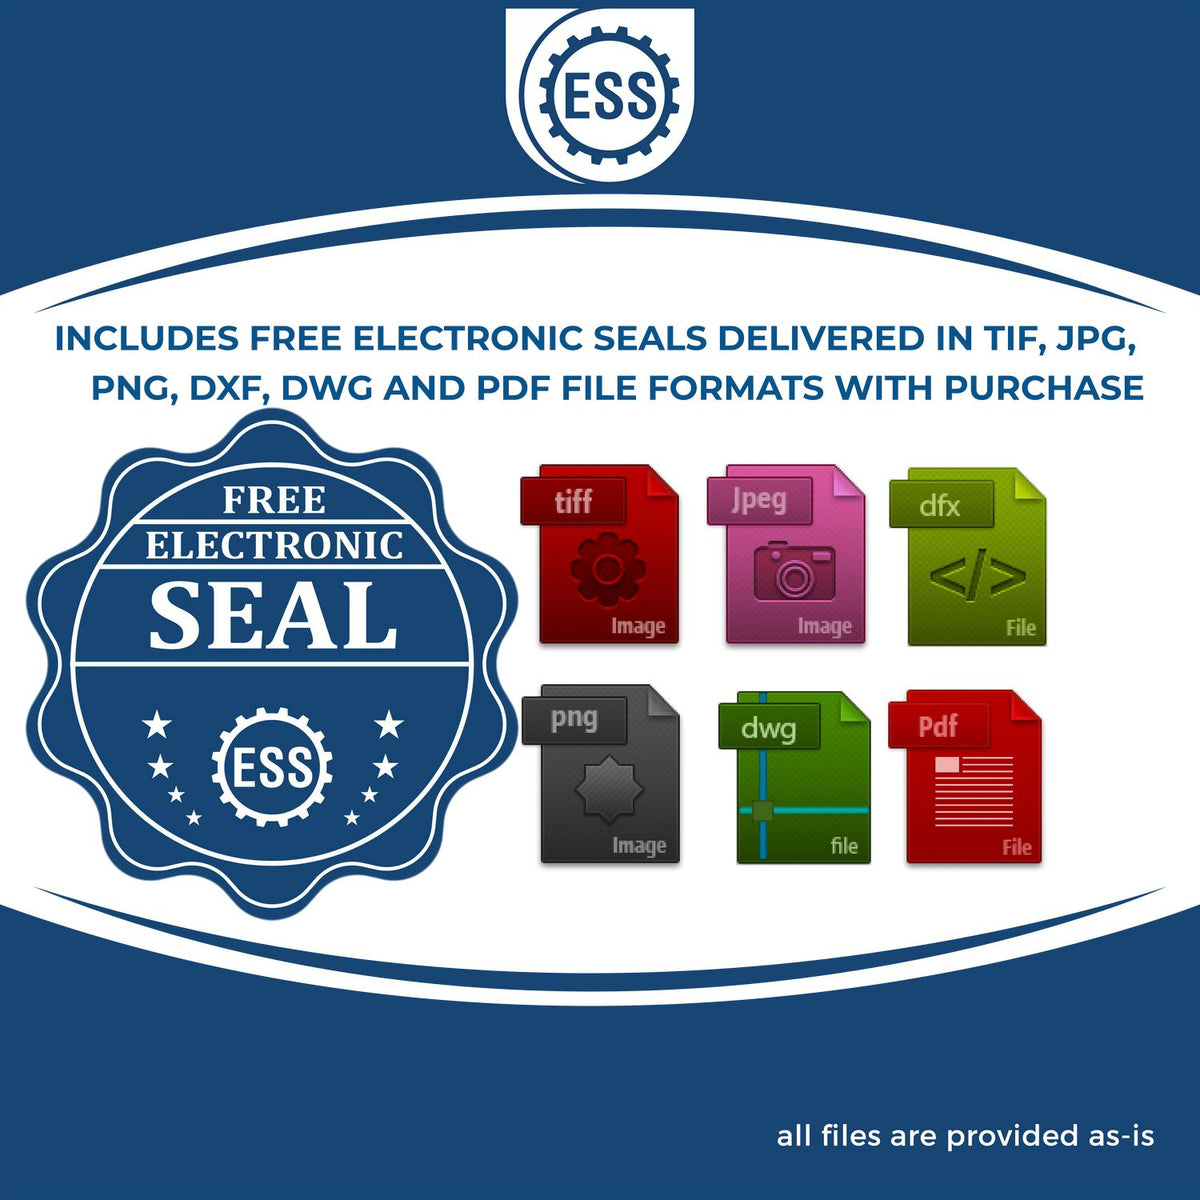 An infographic for the free electronic seal for the Hybrid Illinois Geologist Seal illustrating the different file type icons such as DXF, DWG, TIF, JPG and PNG.